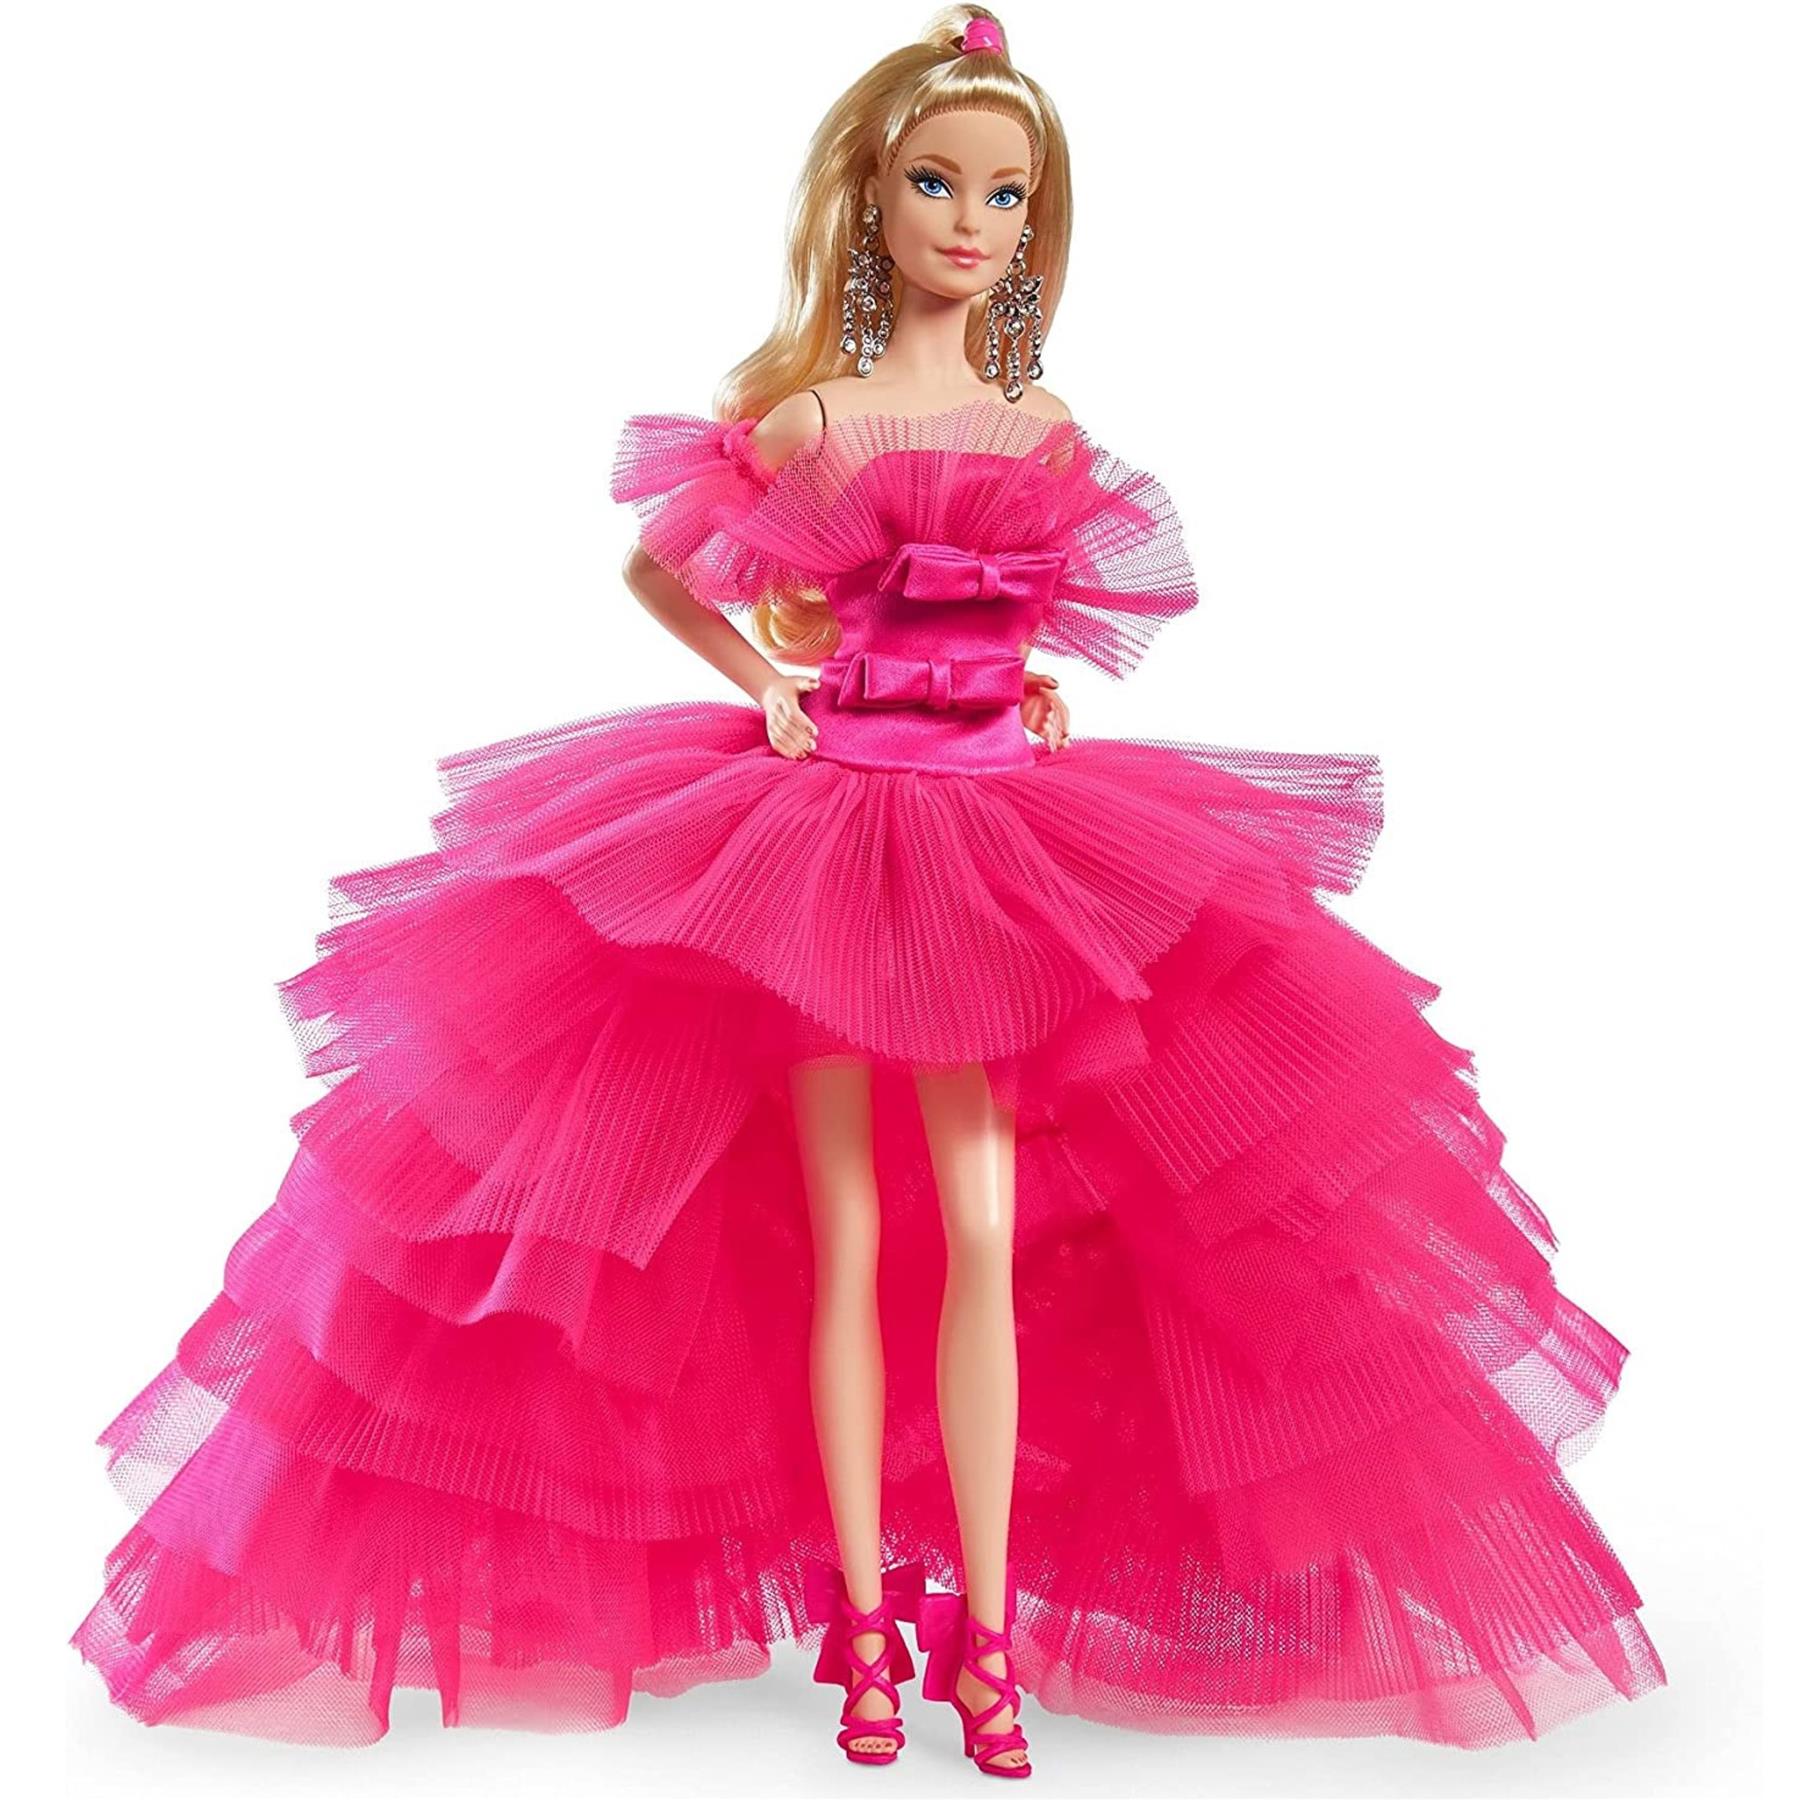 Barbie Pink Collection Doll – Pink Premiere, Barbie Signature Collectable Doll by Barbie - The Magic Toy Shop